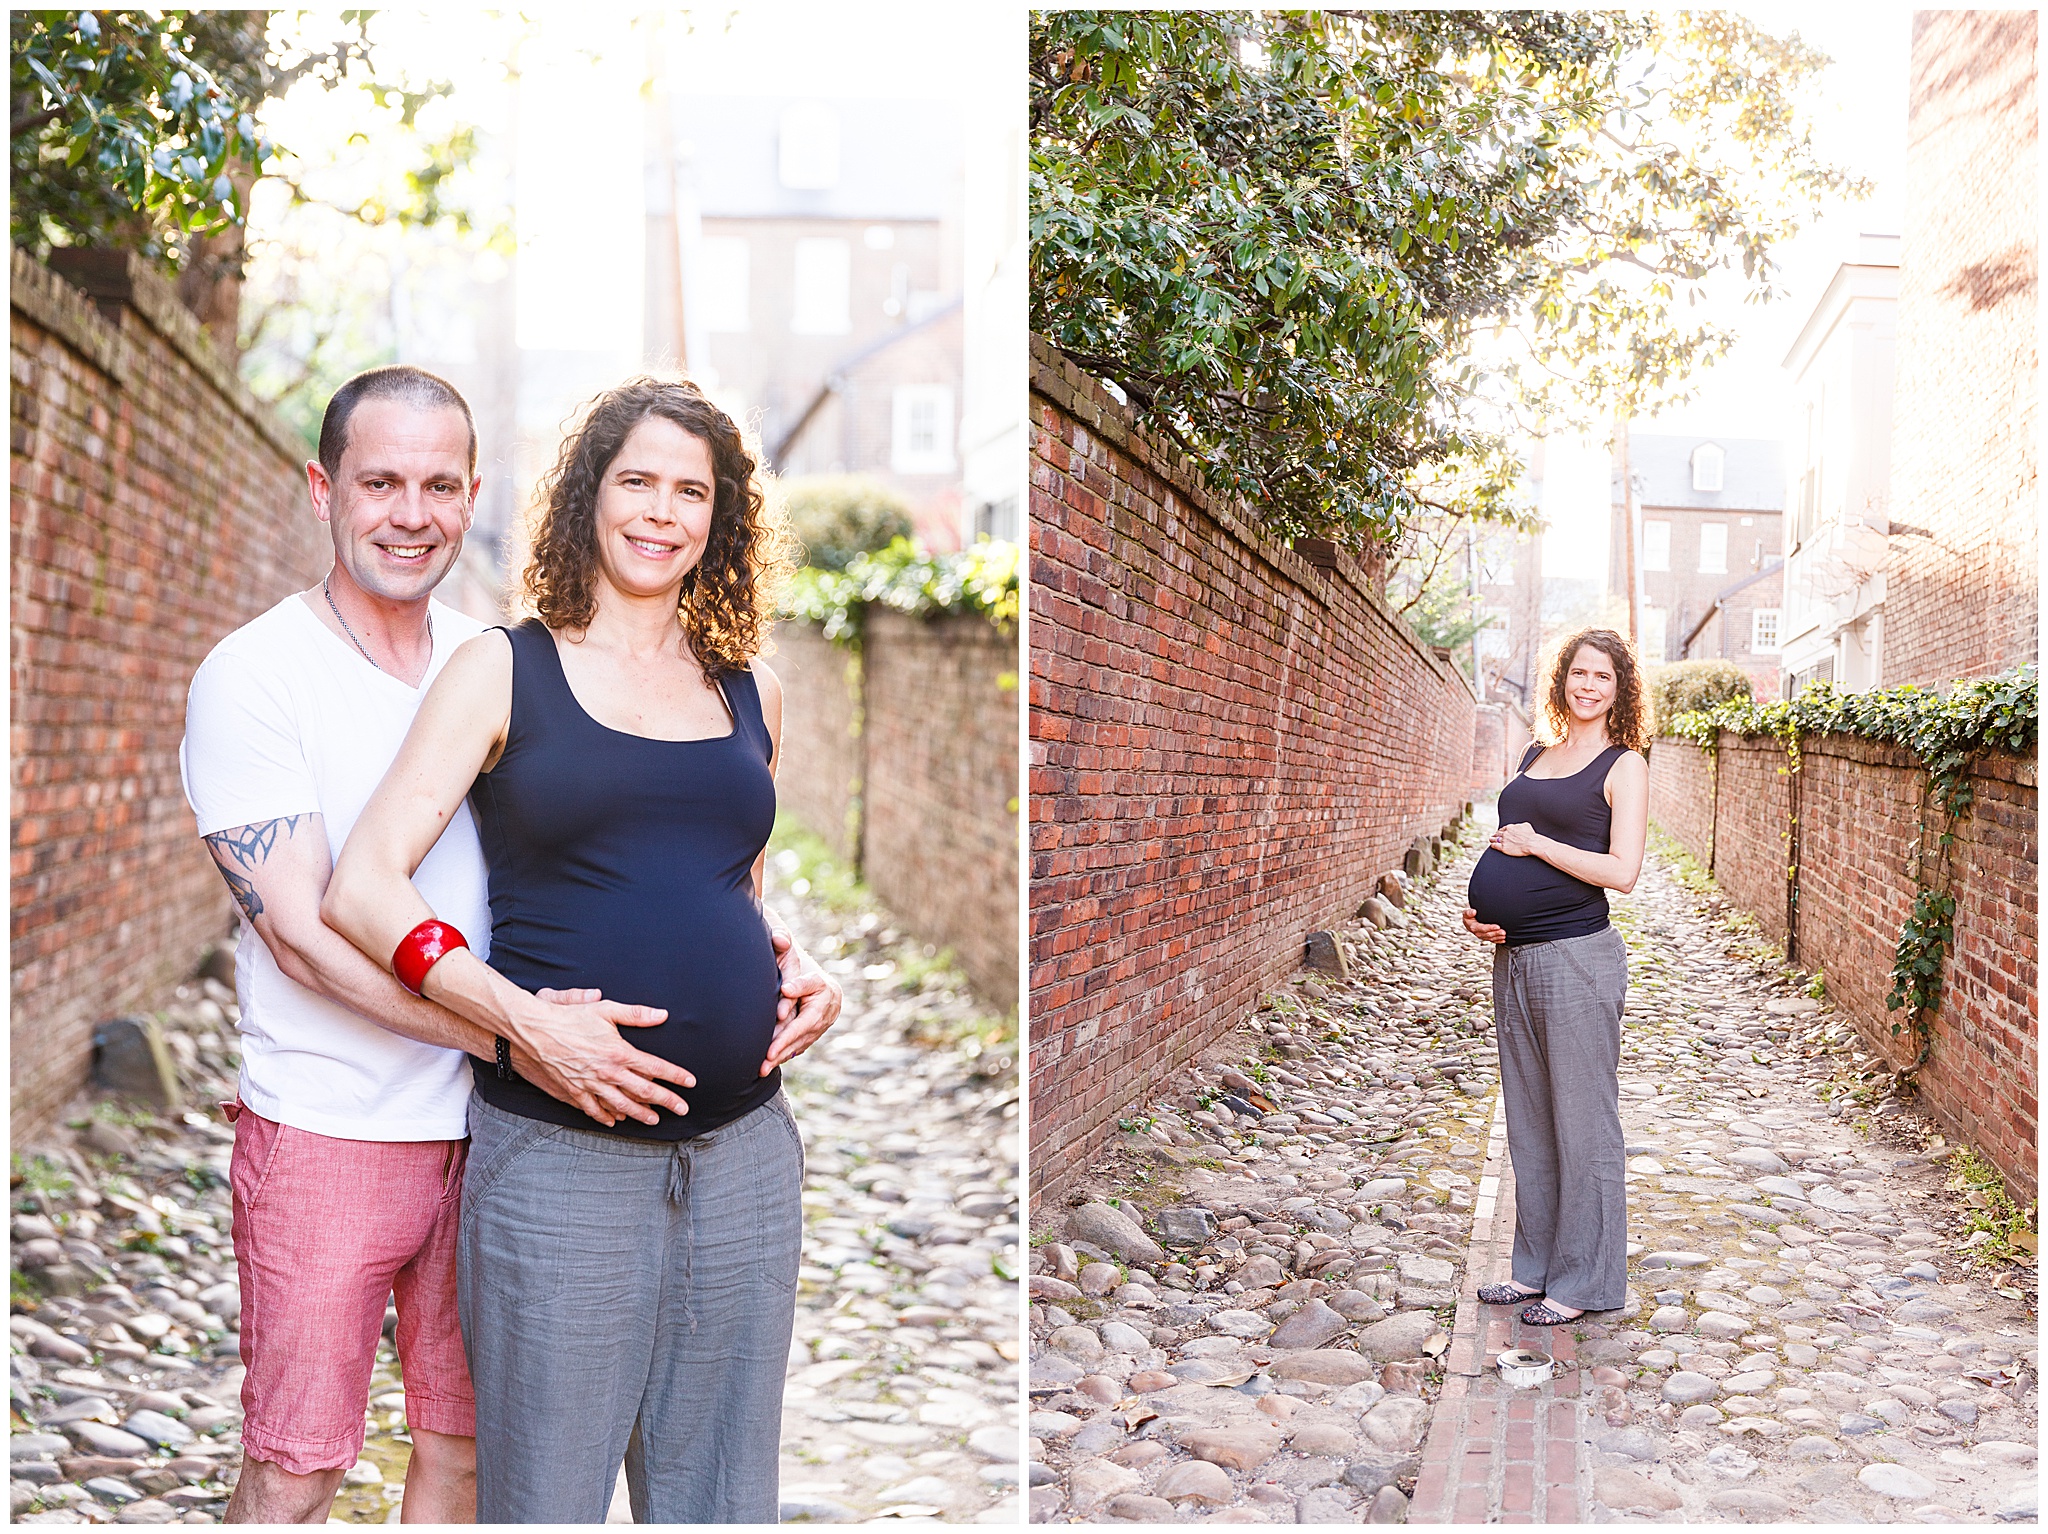 Maternity Session in Old Town Virginia with Kofmehl Photography 